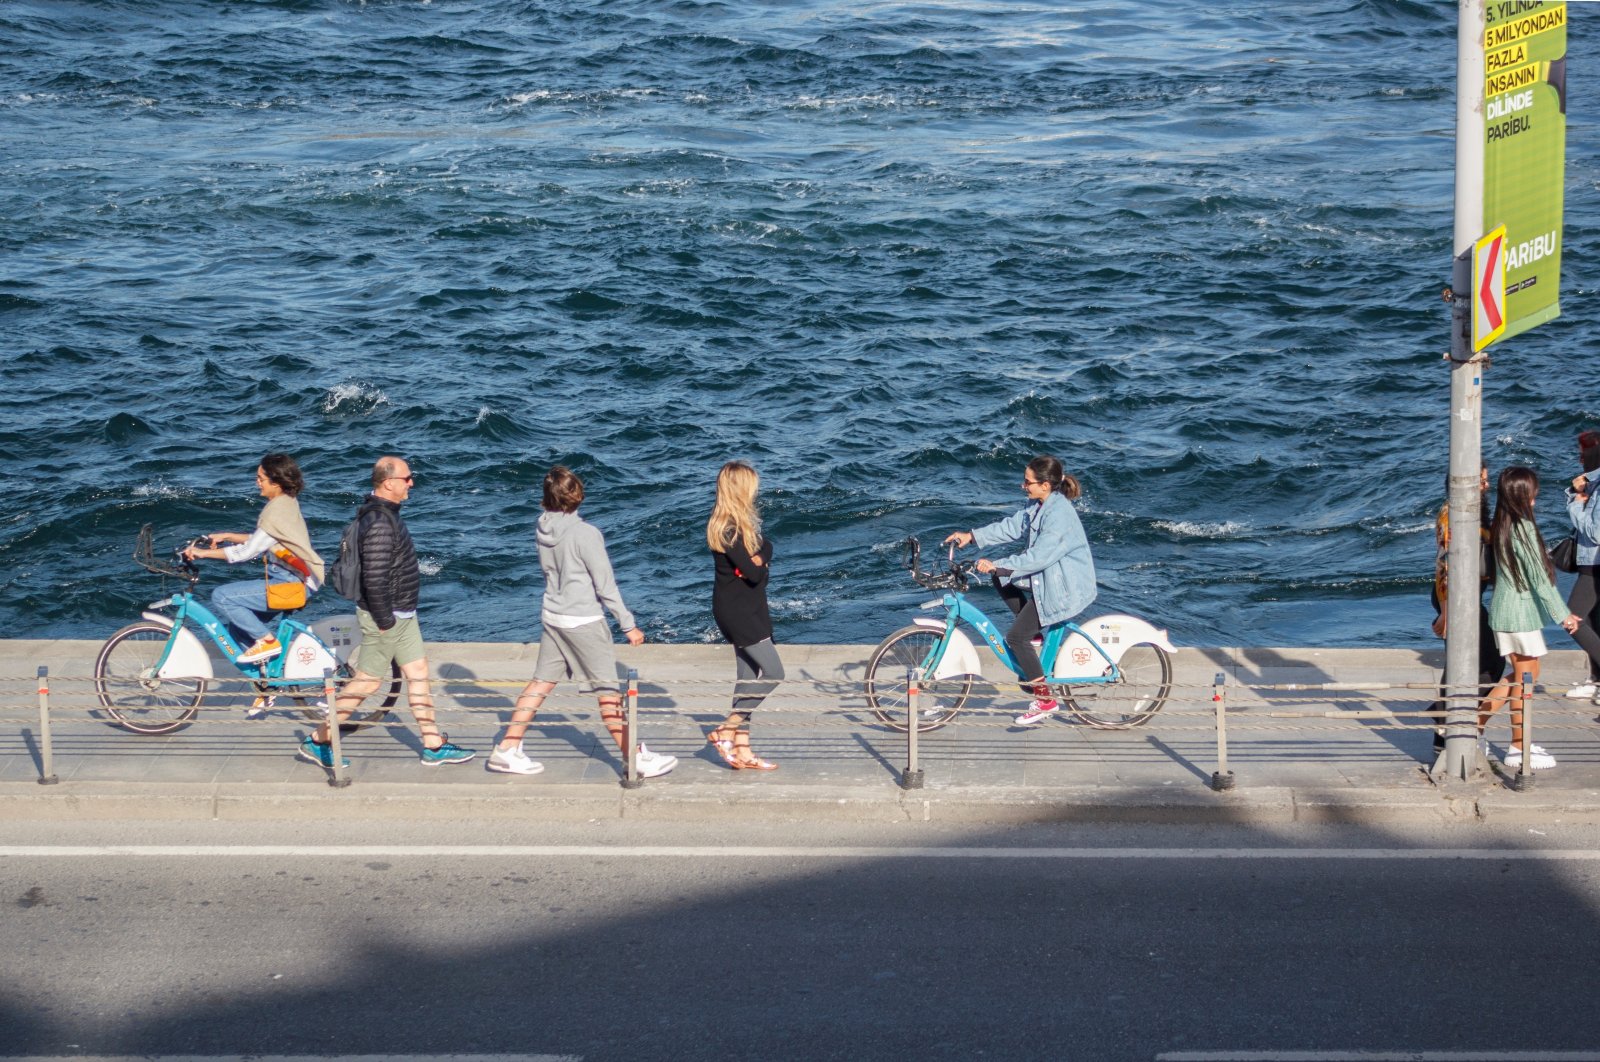 Young people ride bikes and walk near the Bosporus, in Istanbul, Turkey, May 7, 2022. (Shutterstock Photo)